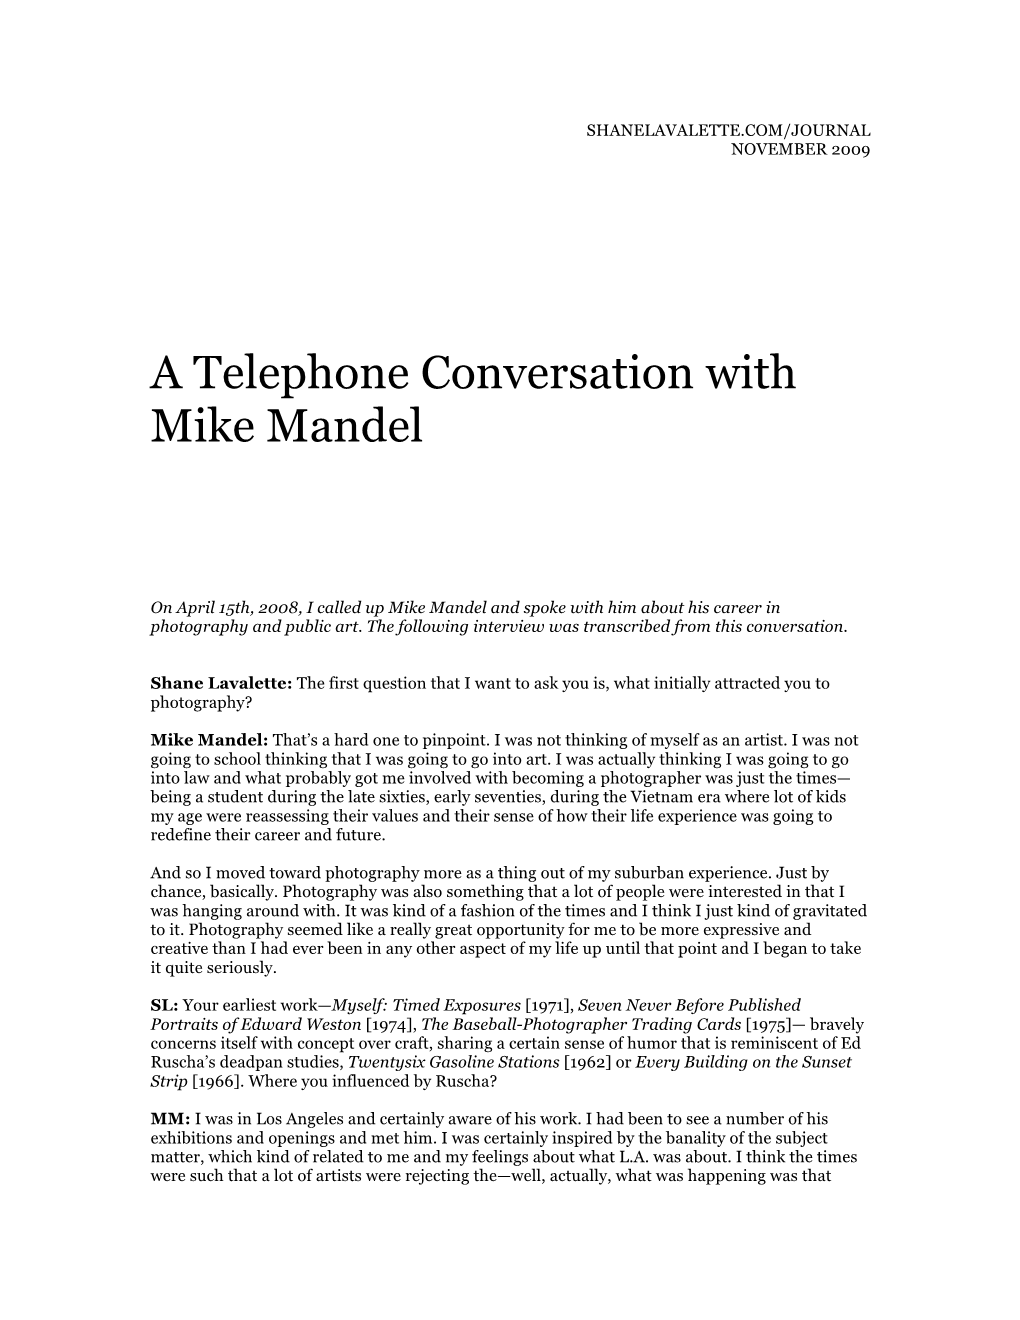 A Telephone Conversation with Mike Mandel